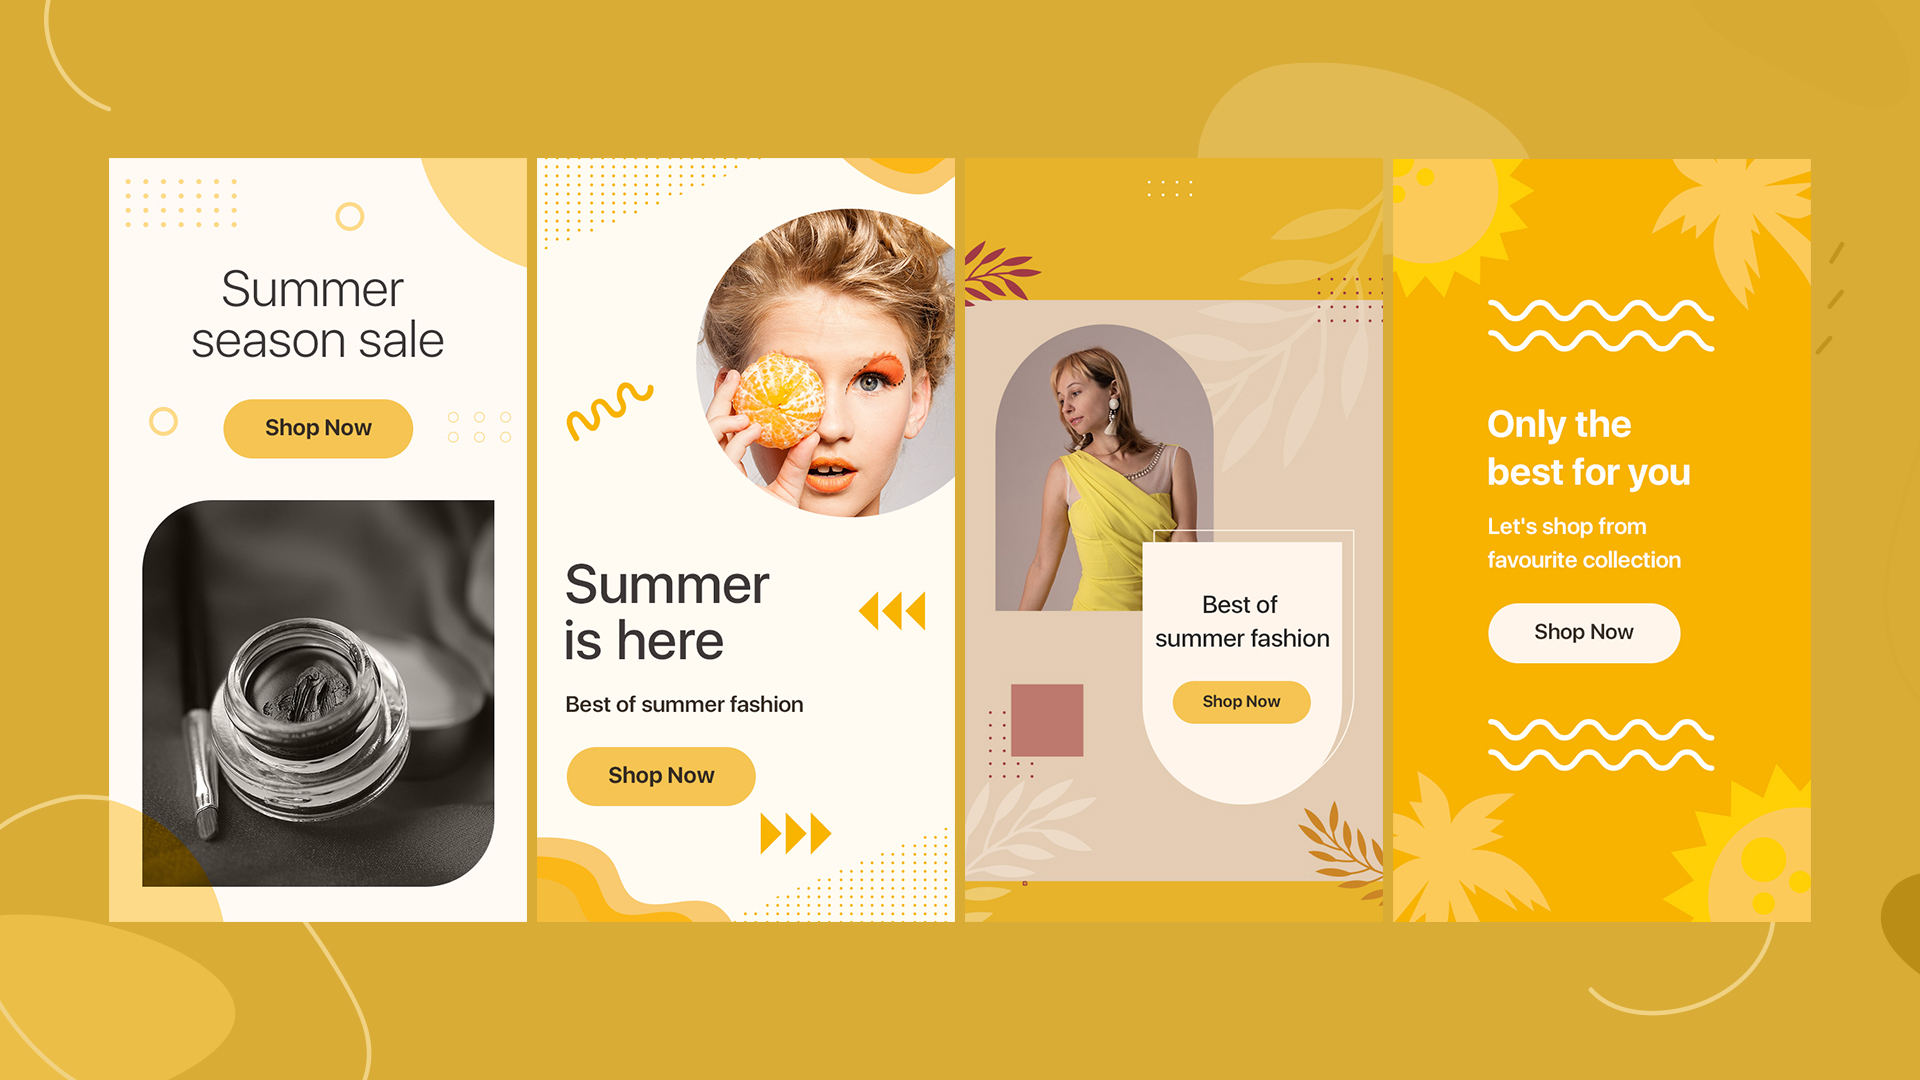 Templates showing yellow as the prominent color